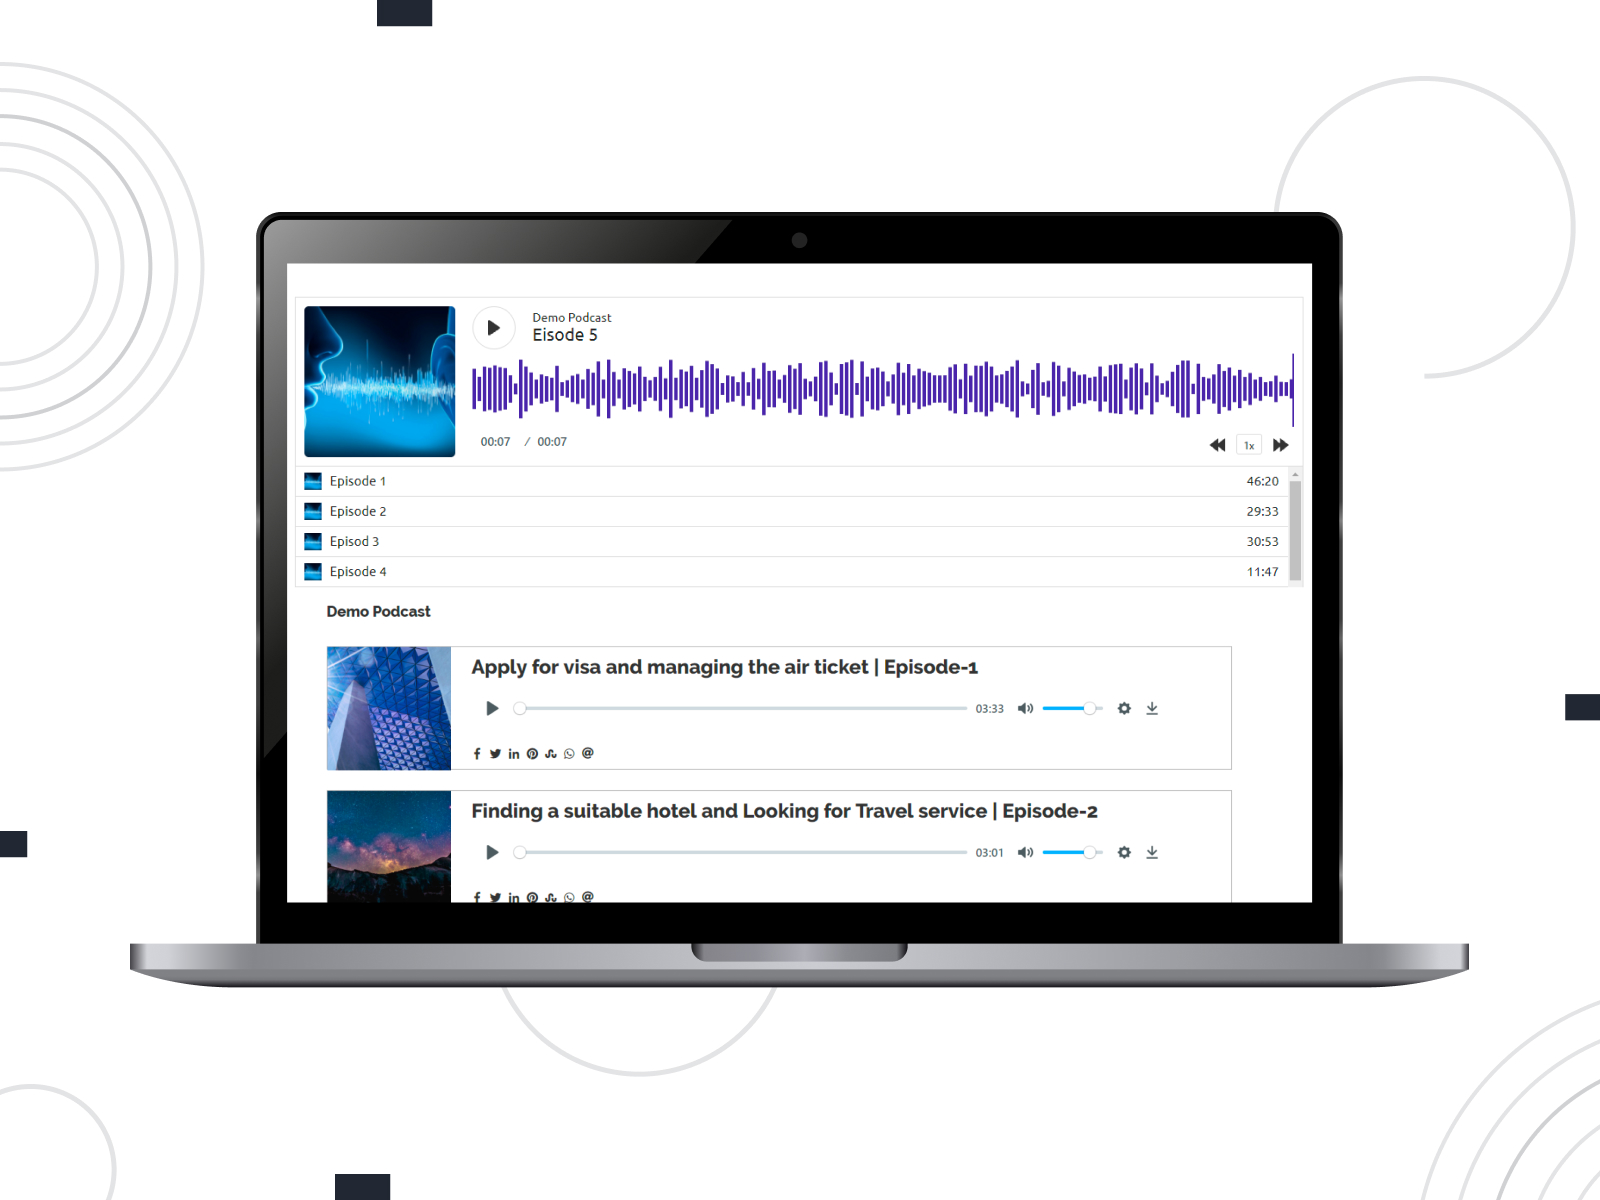 Artwork of Liteweight Podcast, a user-friendly & free podcasting tool.